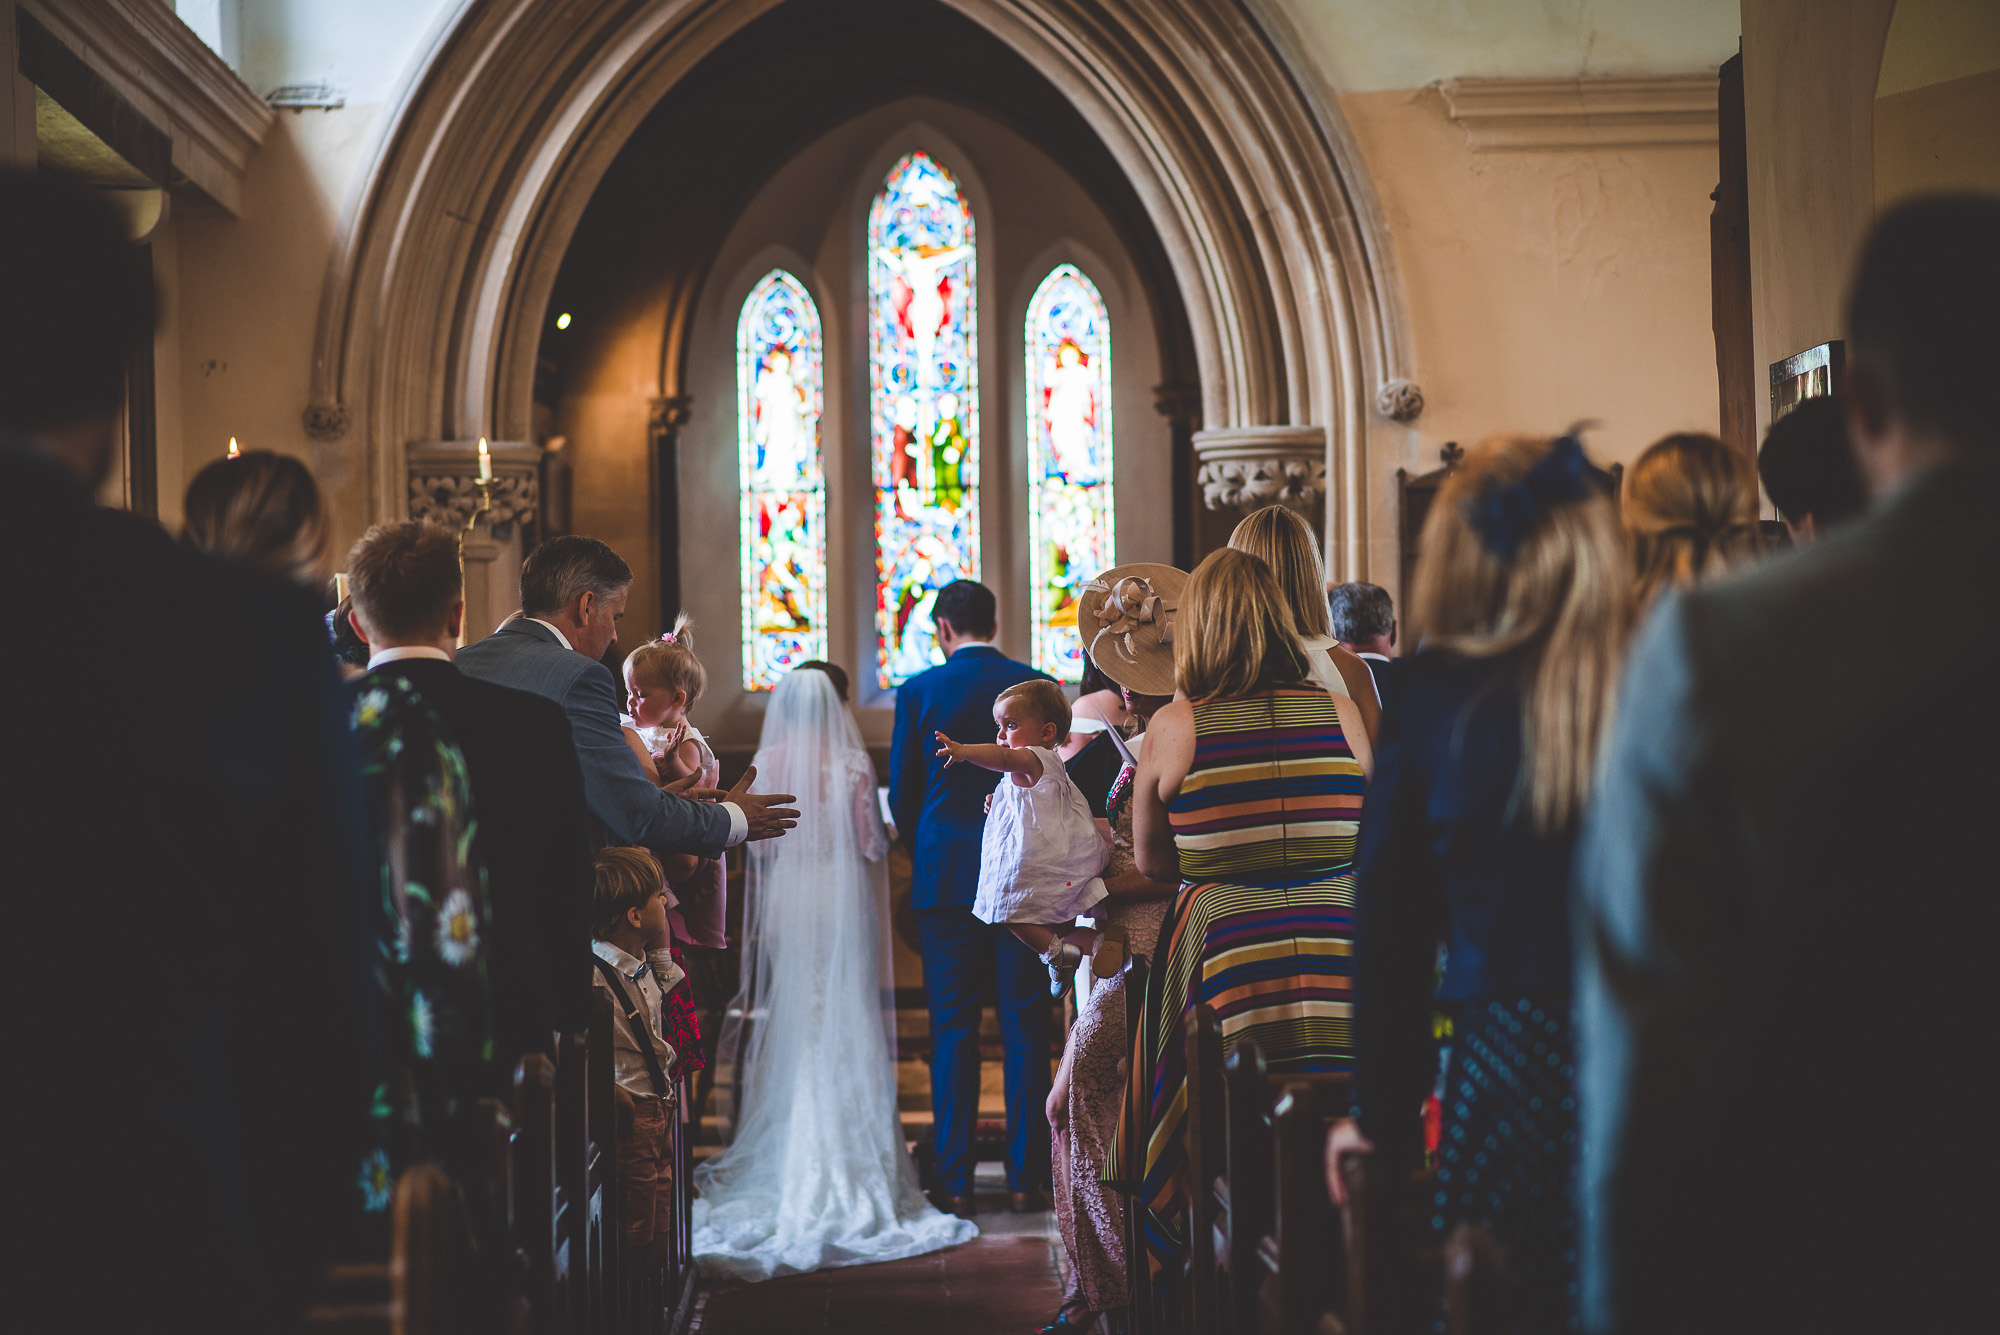 A bride and groom captured by a wedding photographer walking down the aisle in a church.